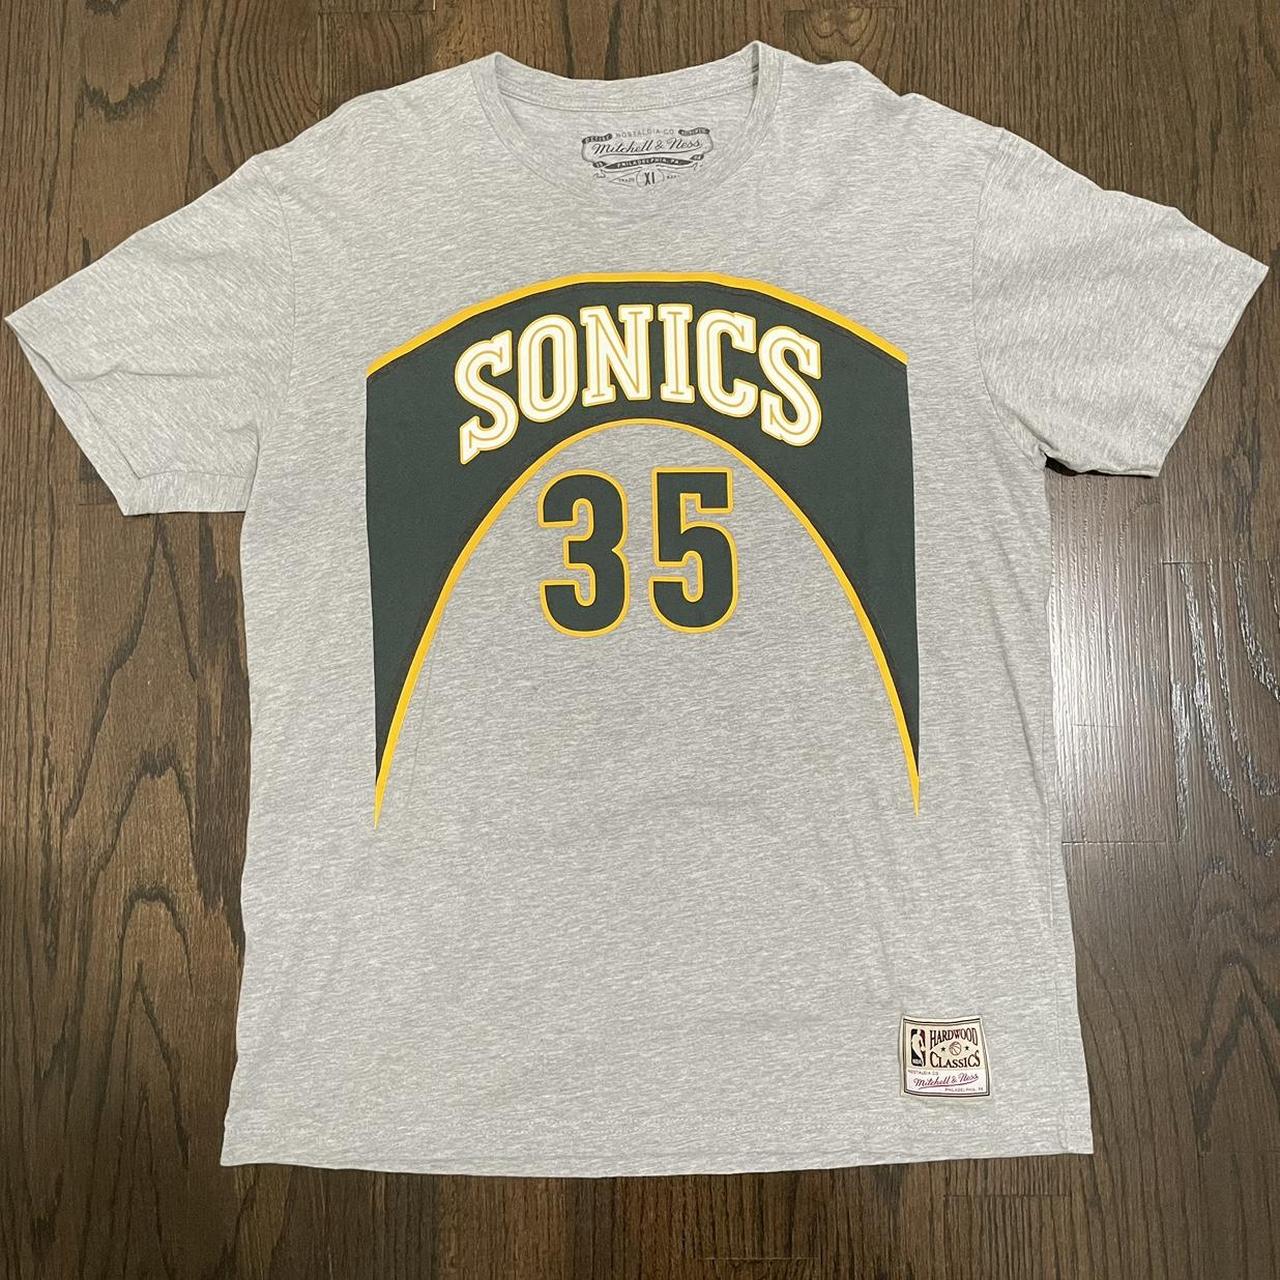 Kevin Durant Seattle SuperSonics Mitchell & Ness Hardwood